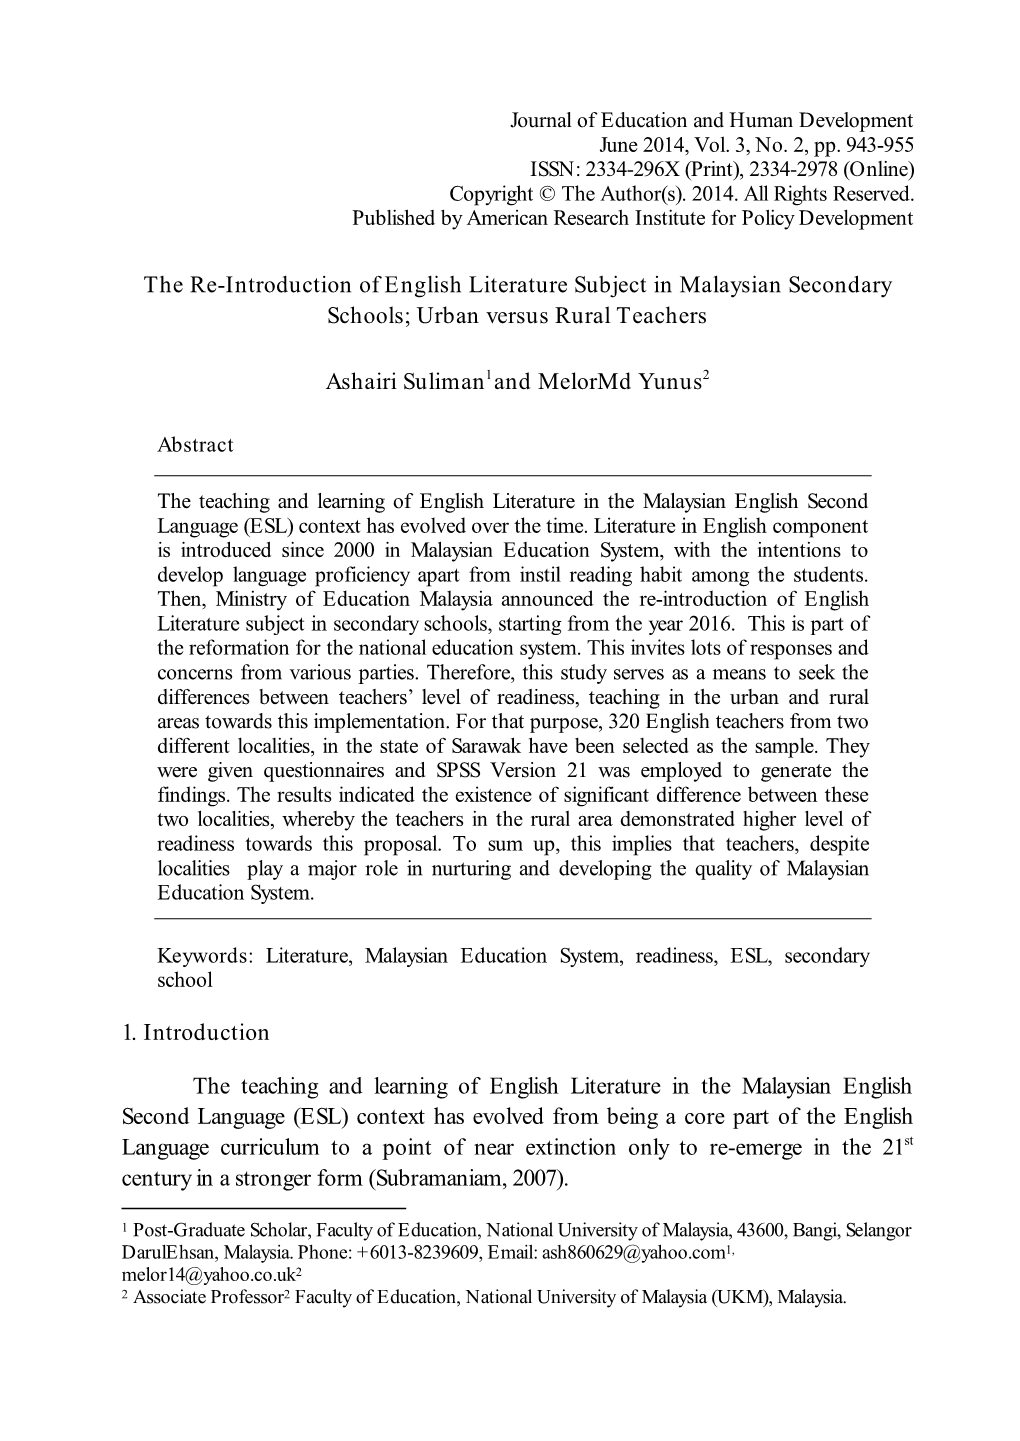 The Re-Introduction of English Literature Subject in Malaysian Secondary Schools; Urban Versus Rural Teachers